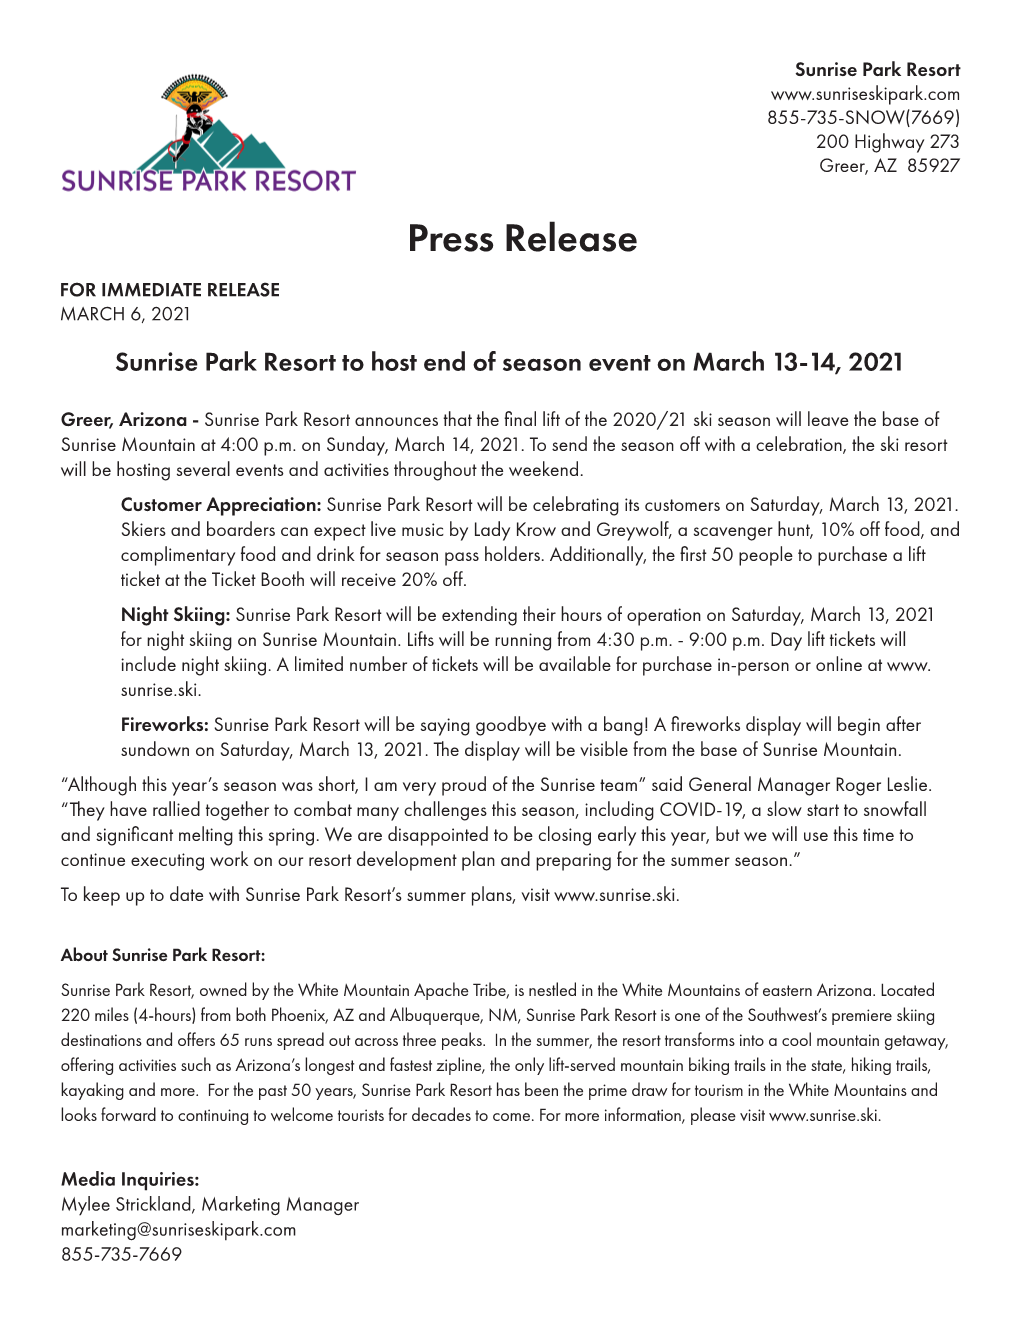 Press Release for IMMEDIATE RELEASE MARCH 6, 2021 Sunrise Park Resort to Host End of Season Event on March 13-14, 2021